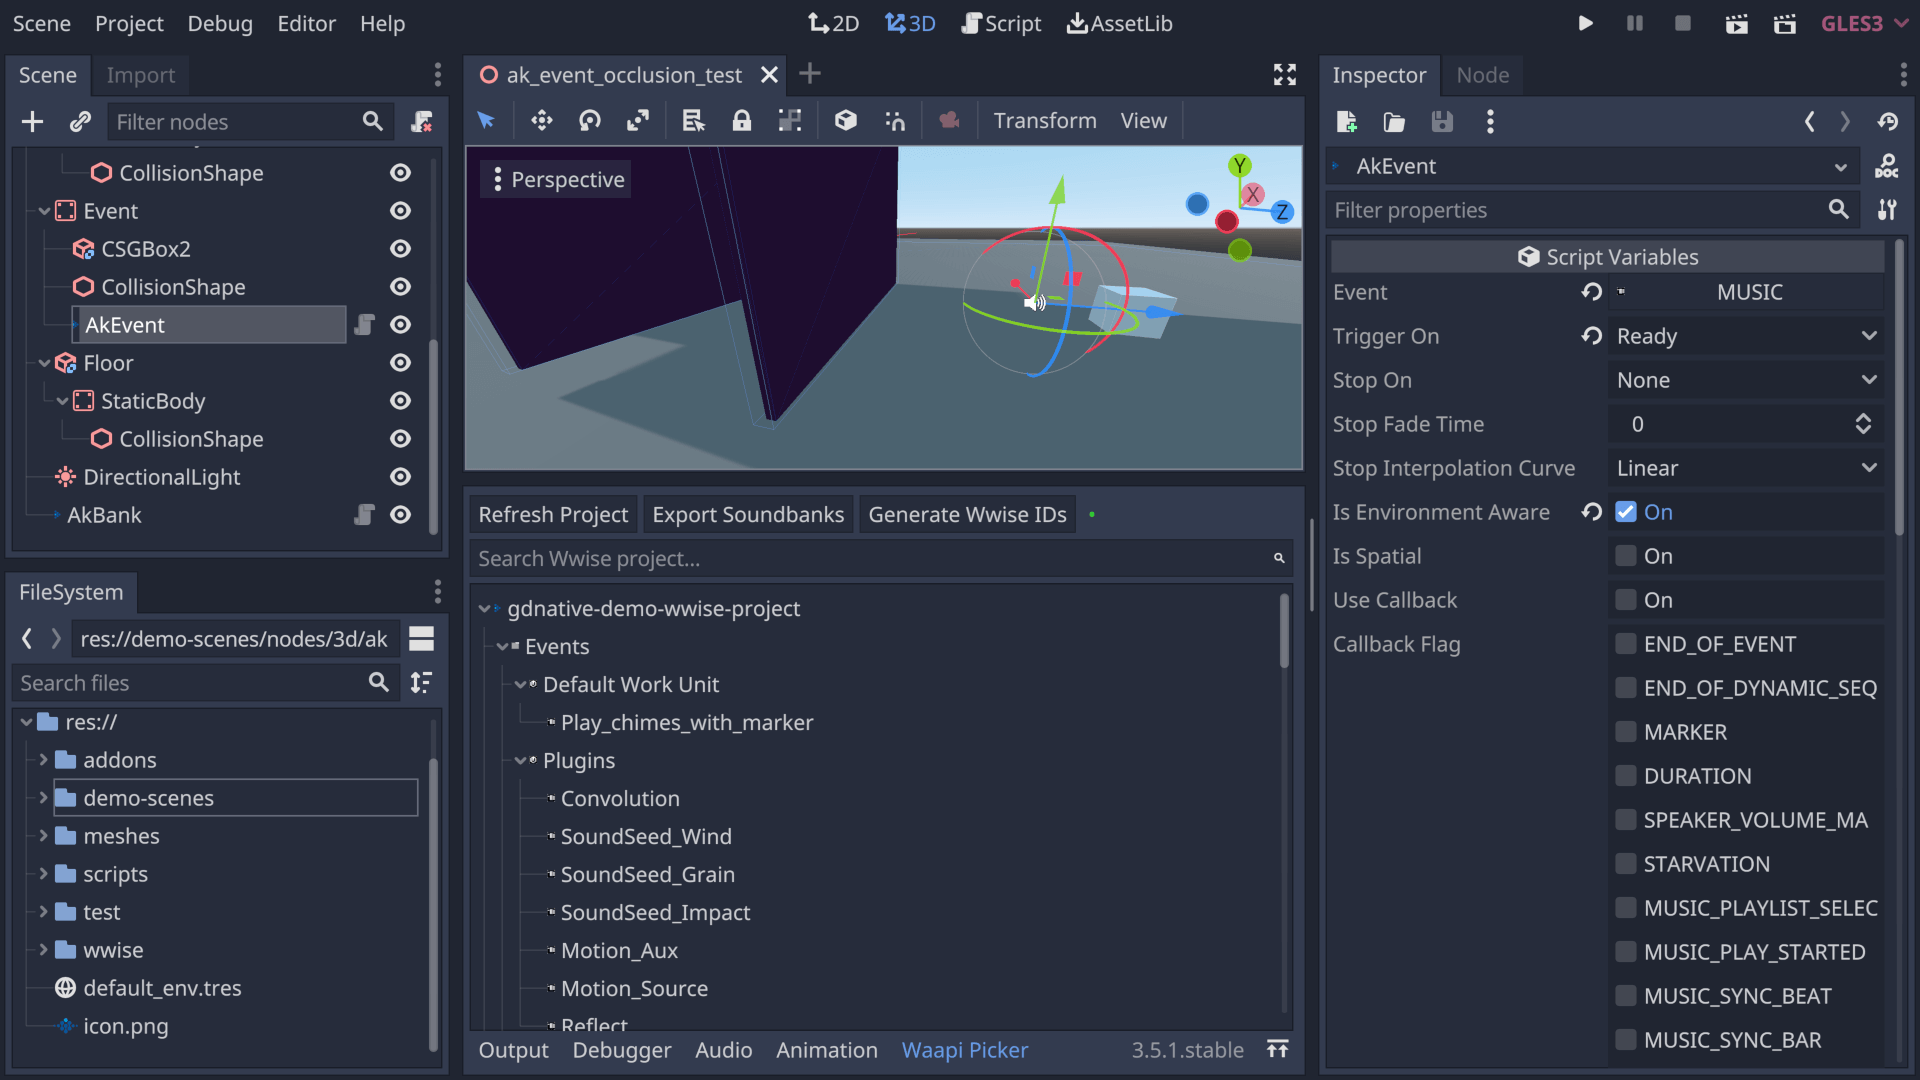 Shows the Wwise integration for Godot 3.5